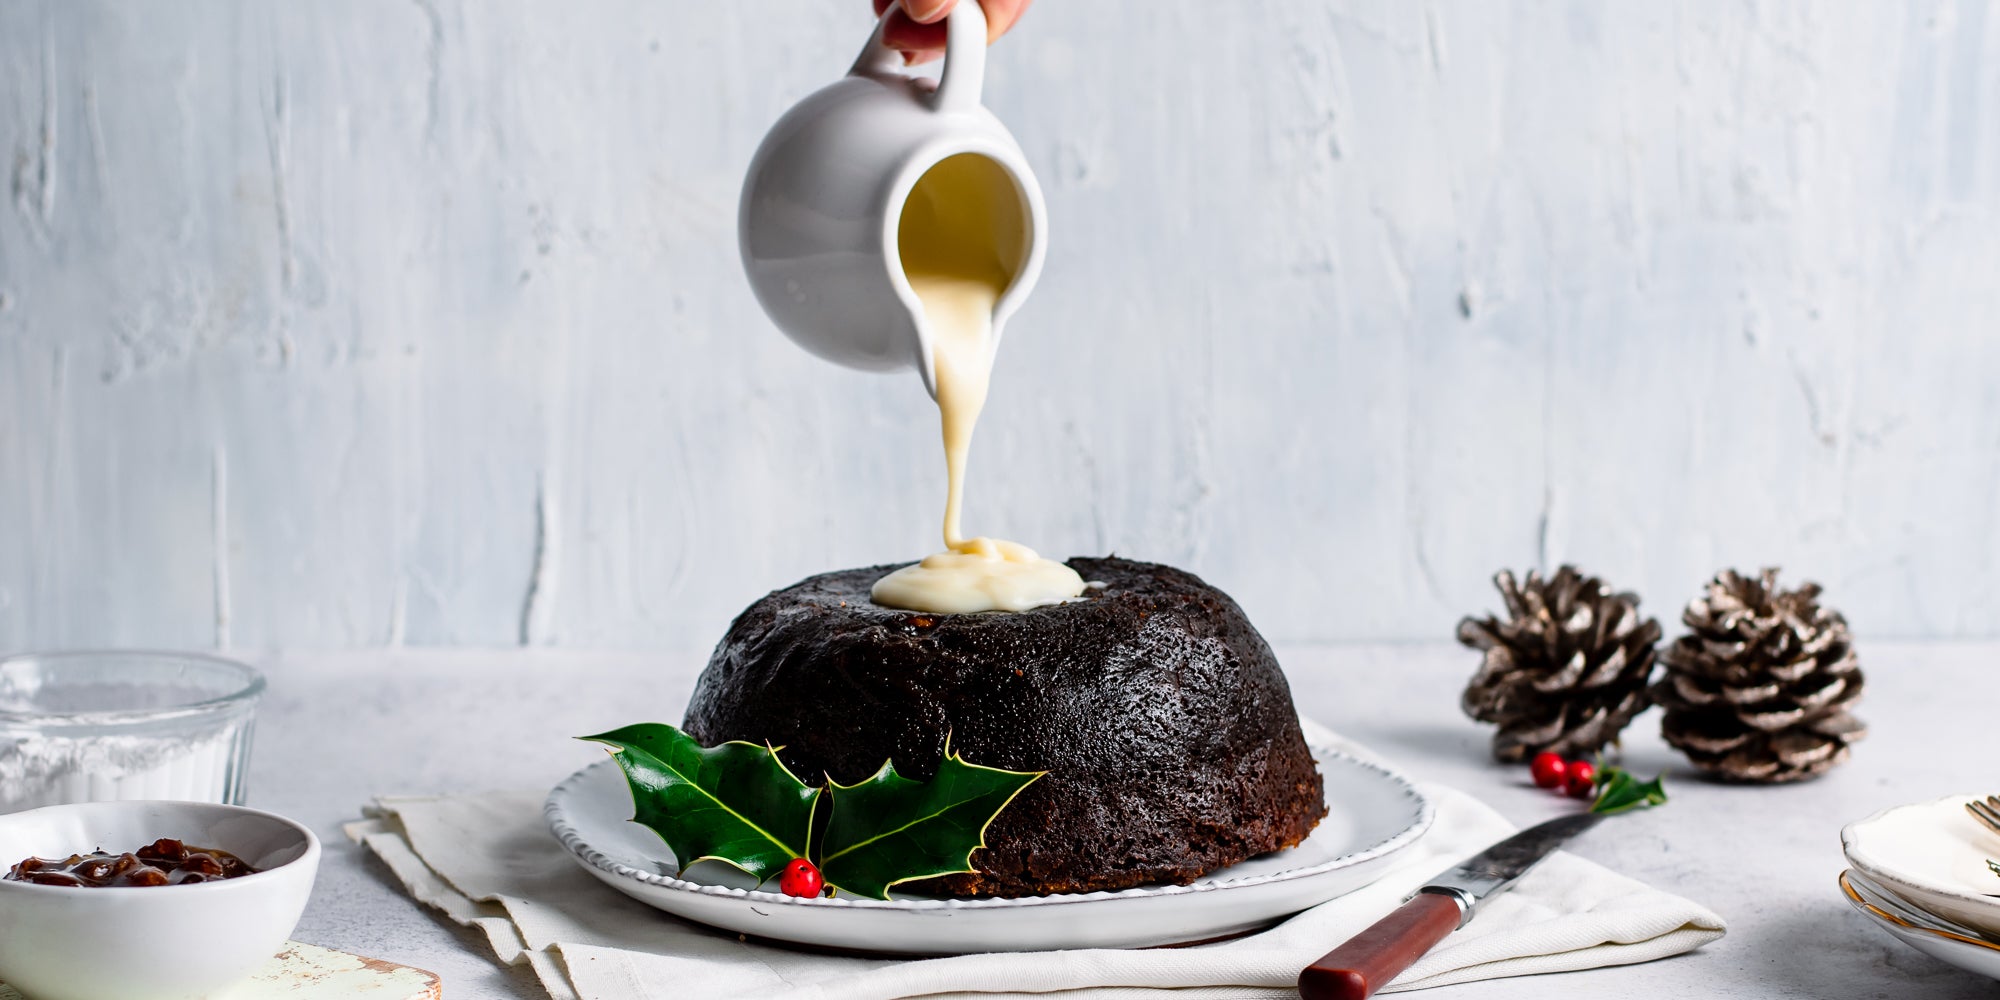 Last Minute Christmas Pudding being poured by a hand holding a jug with cream or brandy butter, next to pine cones and a decorative holly leaf